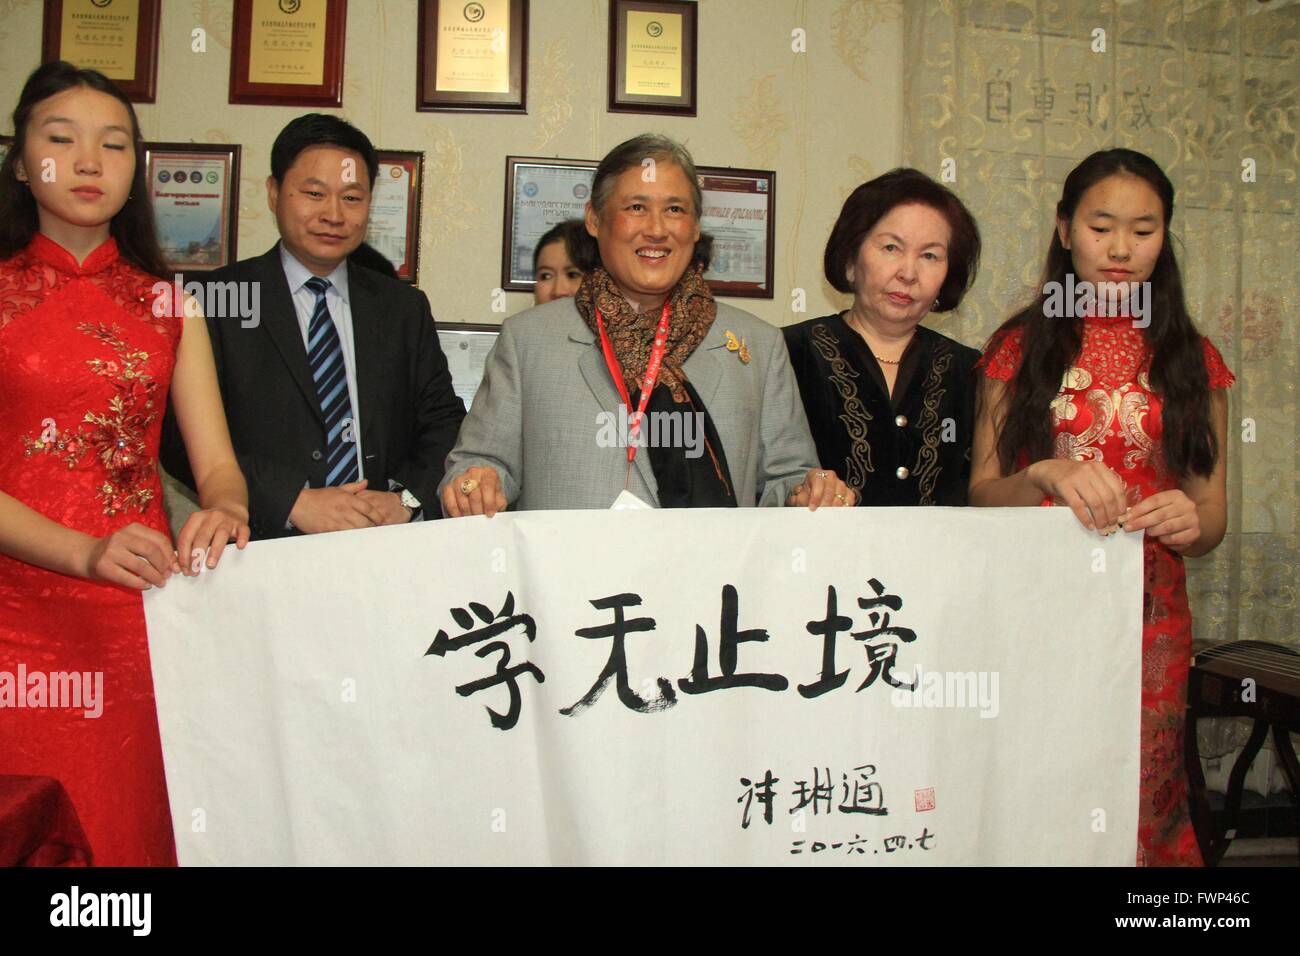 Bishkek. 7th Apr, 2016. Thai Crown Princess Maha Chakri Sirindhorn (C) visits the Confucius Institute in Bishkek, Kyrgyzstan, on April 7, 2016. Thai crown princess Maha Chakri Sirindhorn visited on April 7 the Confucius Institute of Kyrgyz National University during her first visit to Kyrgyzstan. In the Confucius Institute, the Thai princess talked in Chinese with students and teachers, wrote in Chinese calligraphy 'Knowledge is infinite' and even recited the Chinese poetry 'Quiet Night Thoughts' of the famous ancient Chinese poet Li Bai. Credit:  Xinhua/Alamy Live News Stock Photo